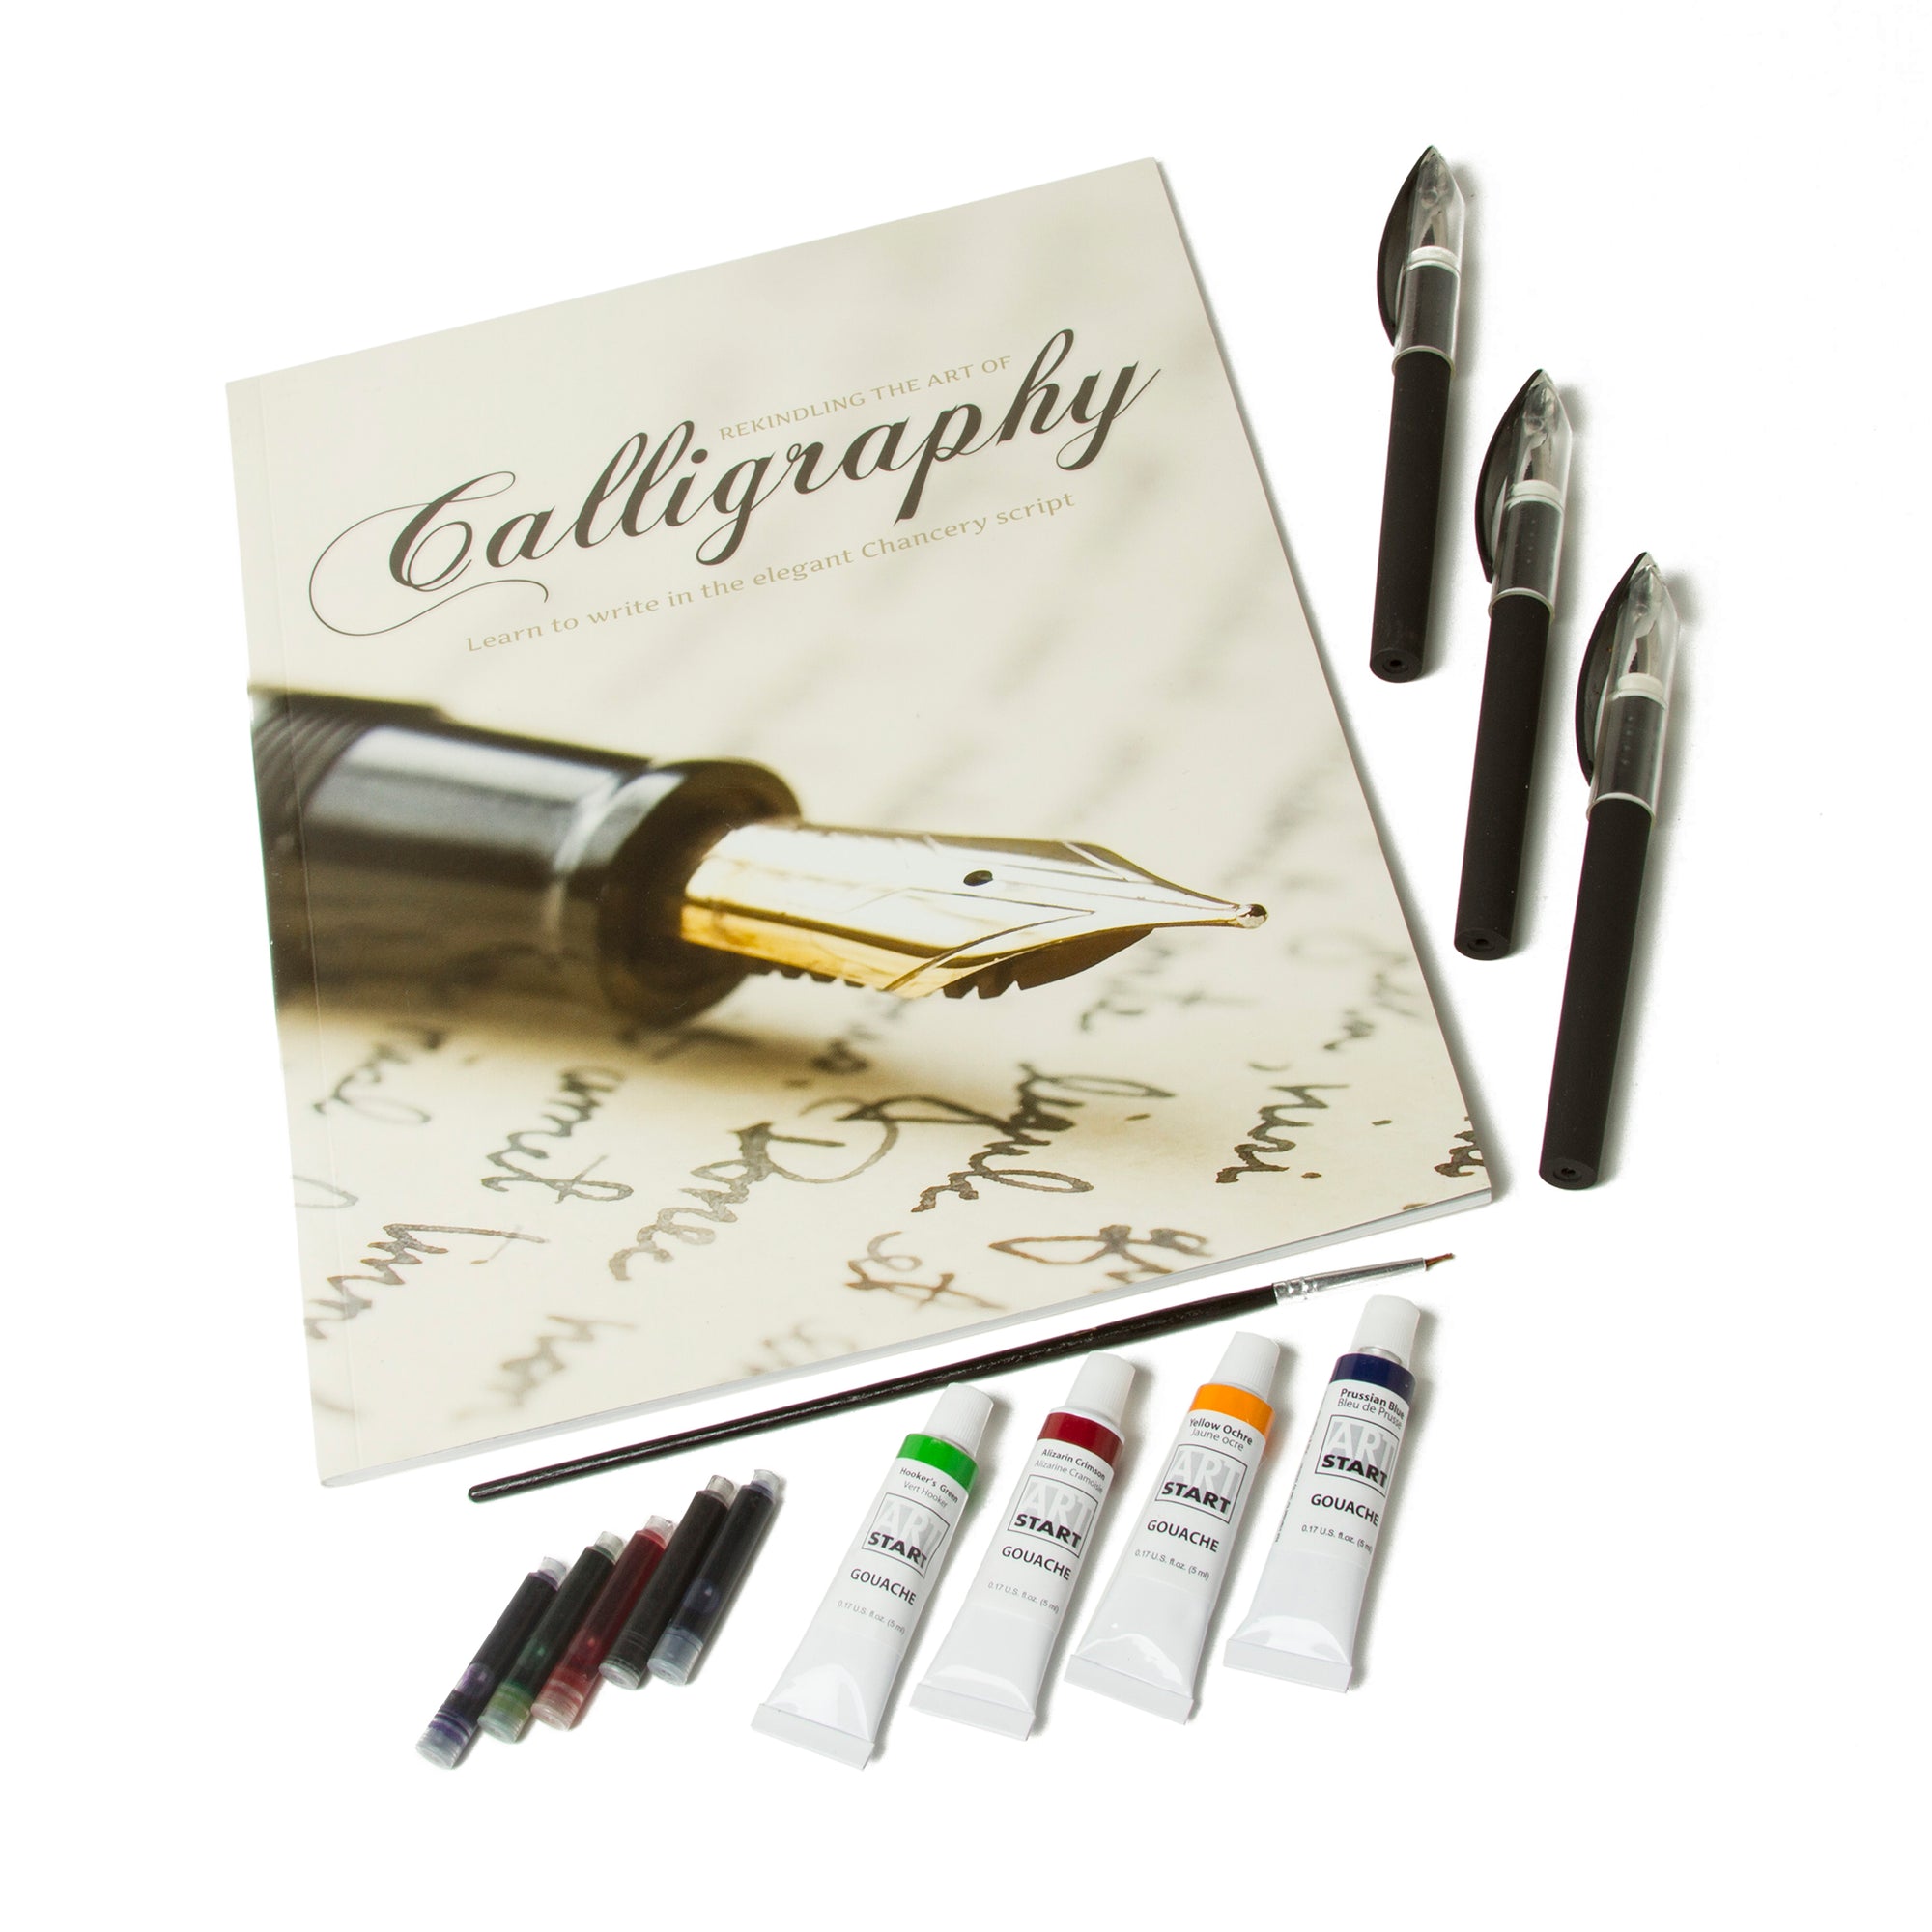 Rekindling the art of Calligraphy | Getty Store